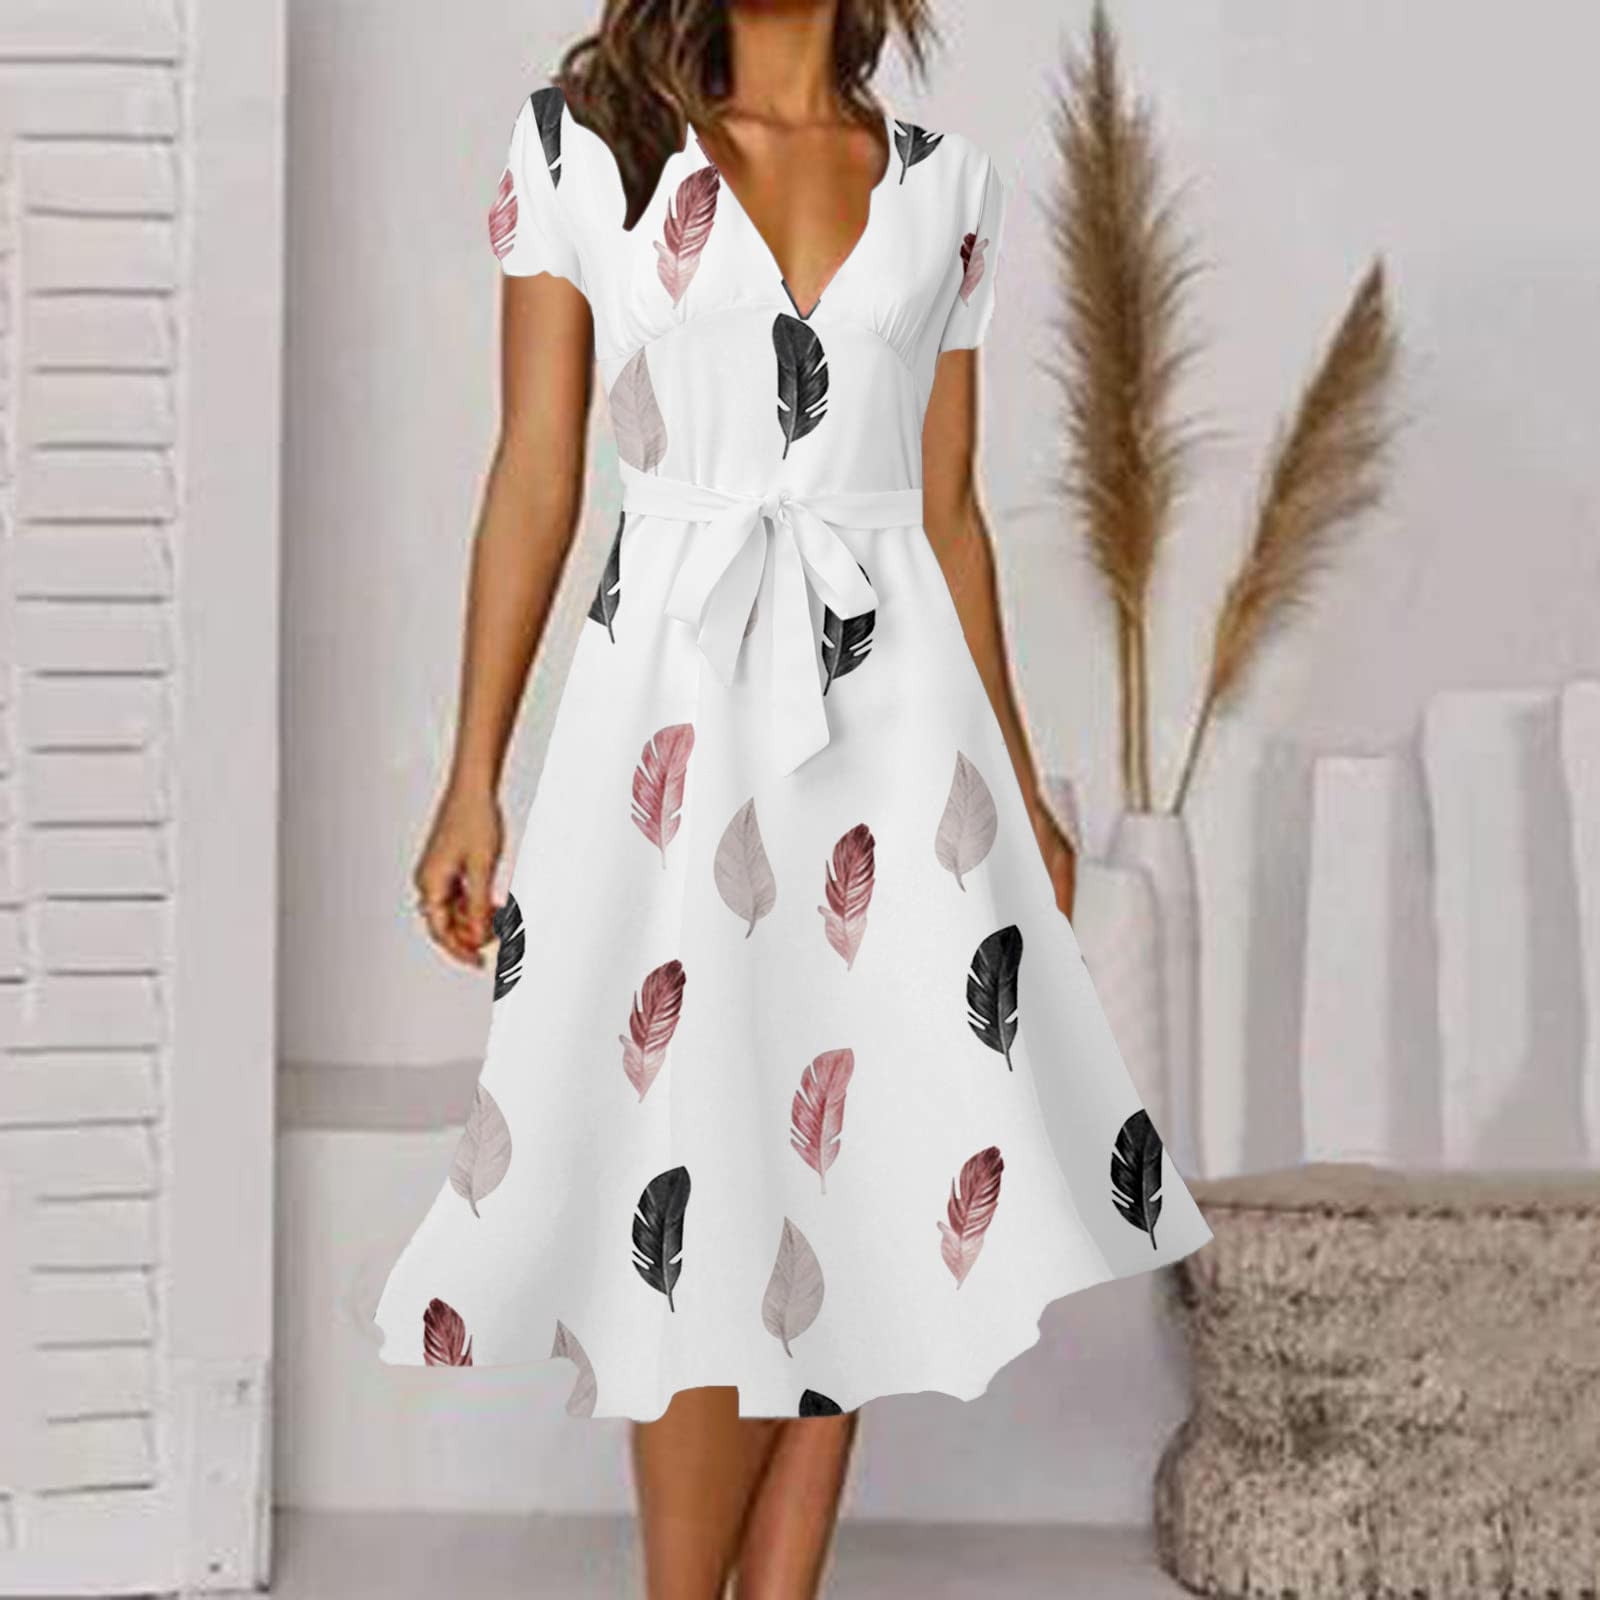 Auroural clearance dress plus size Women's Fashion Sexy Vintage V Neck  Short Sleeve Printing Party Dresses